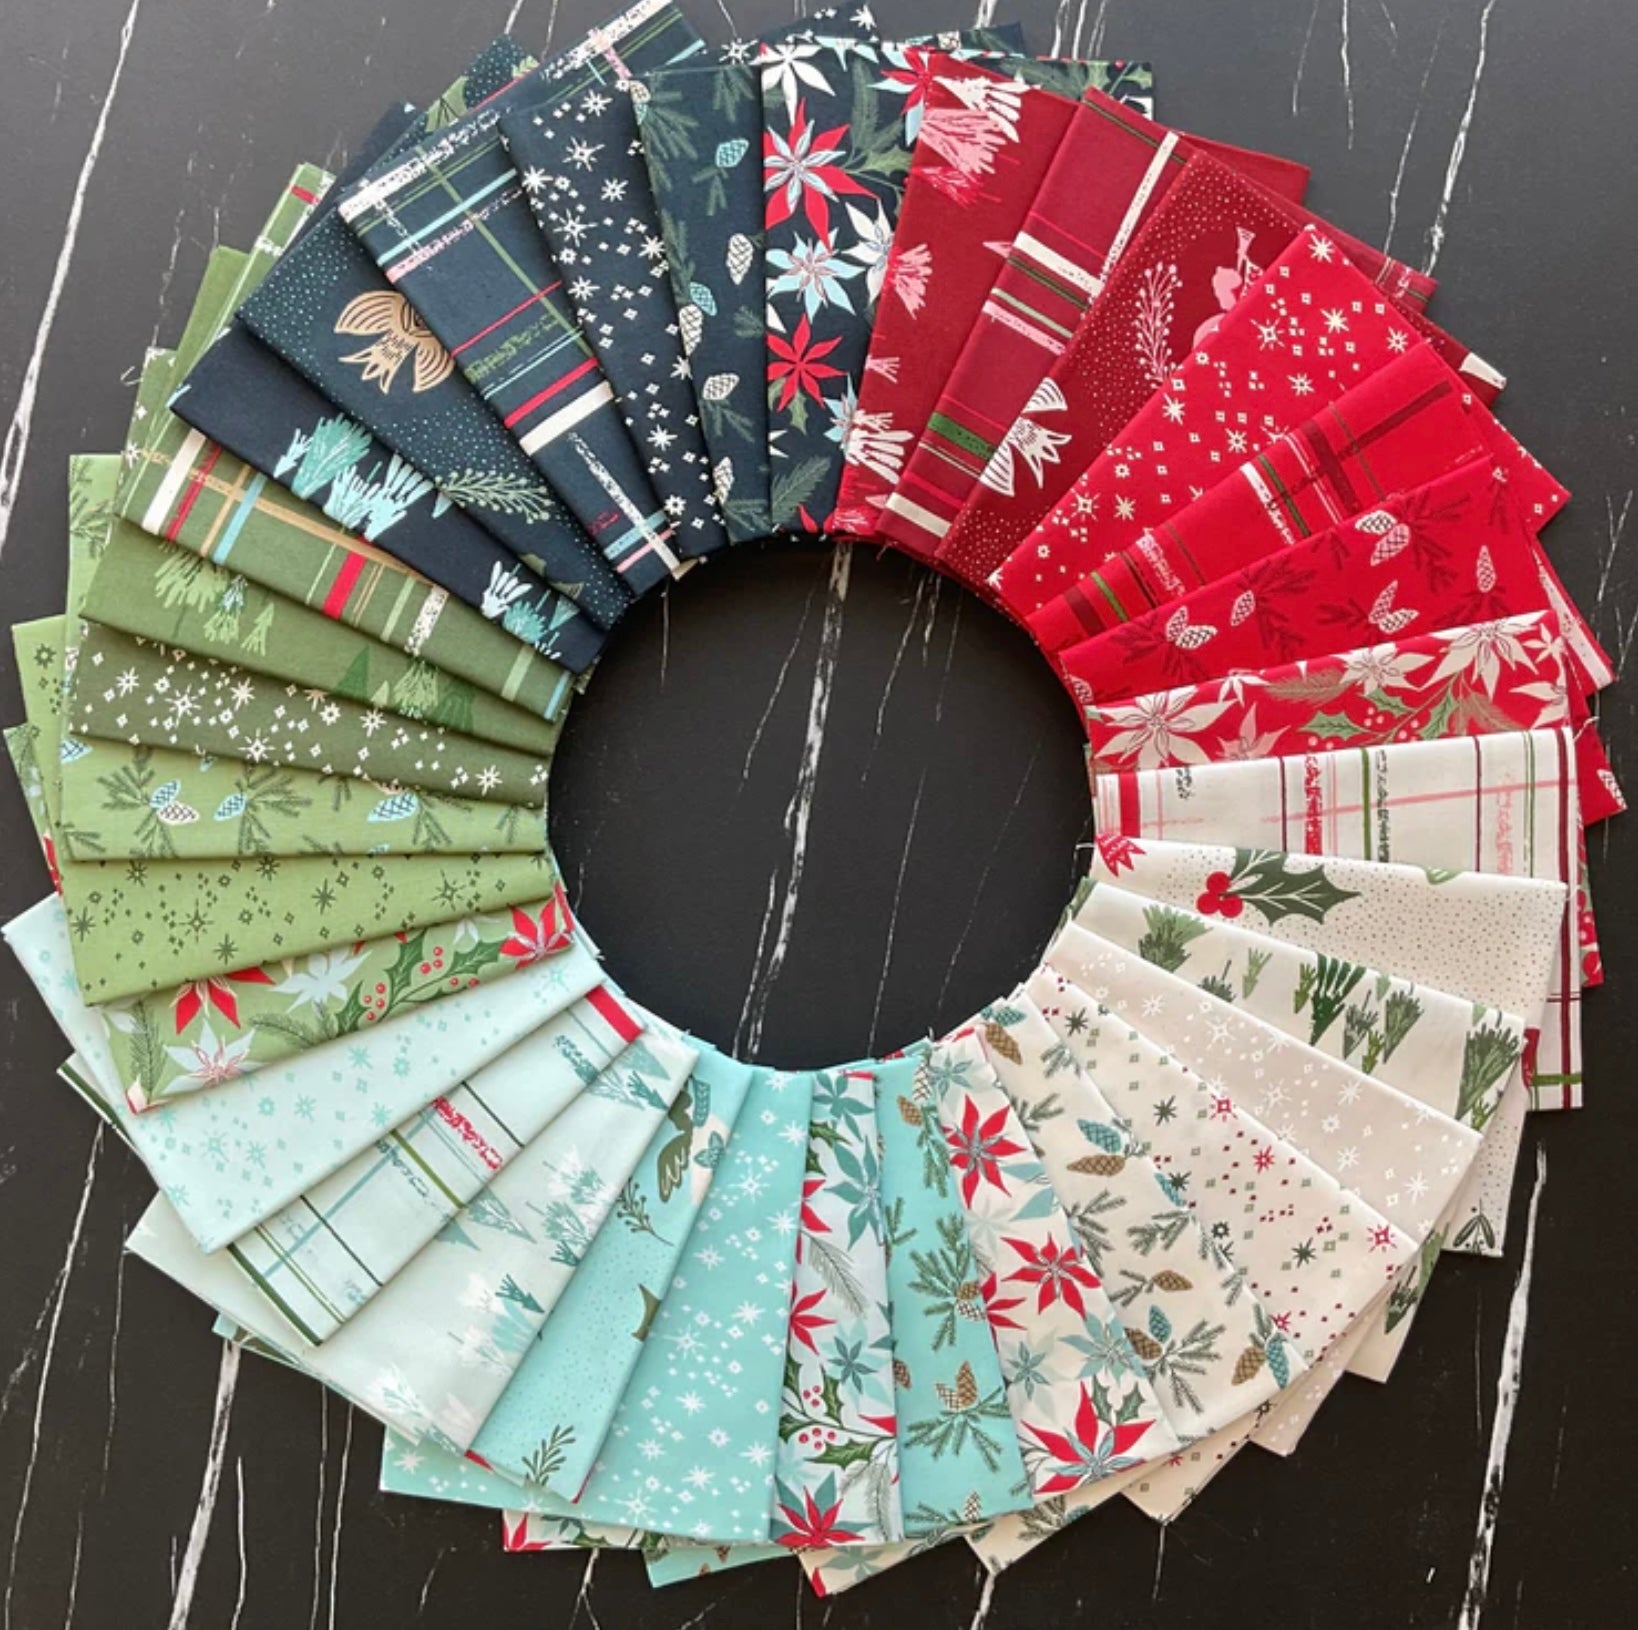 Kitty Christmas Jelly Roll by Urban Chiks for Moda Fabrics - RESERVE